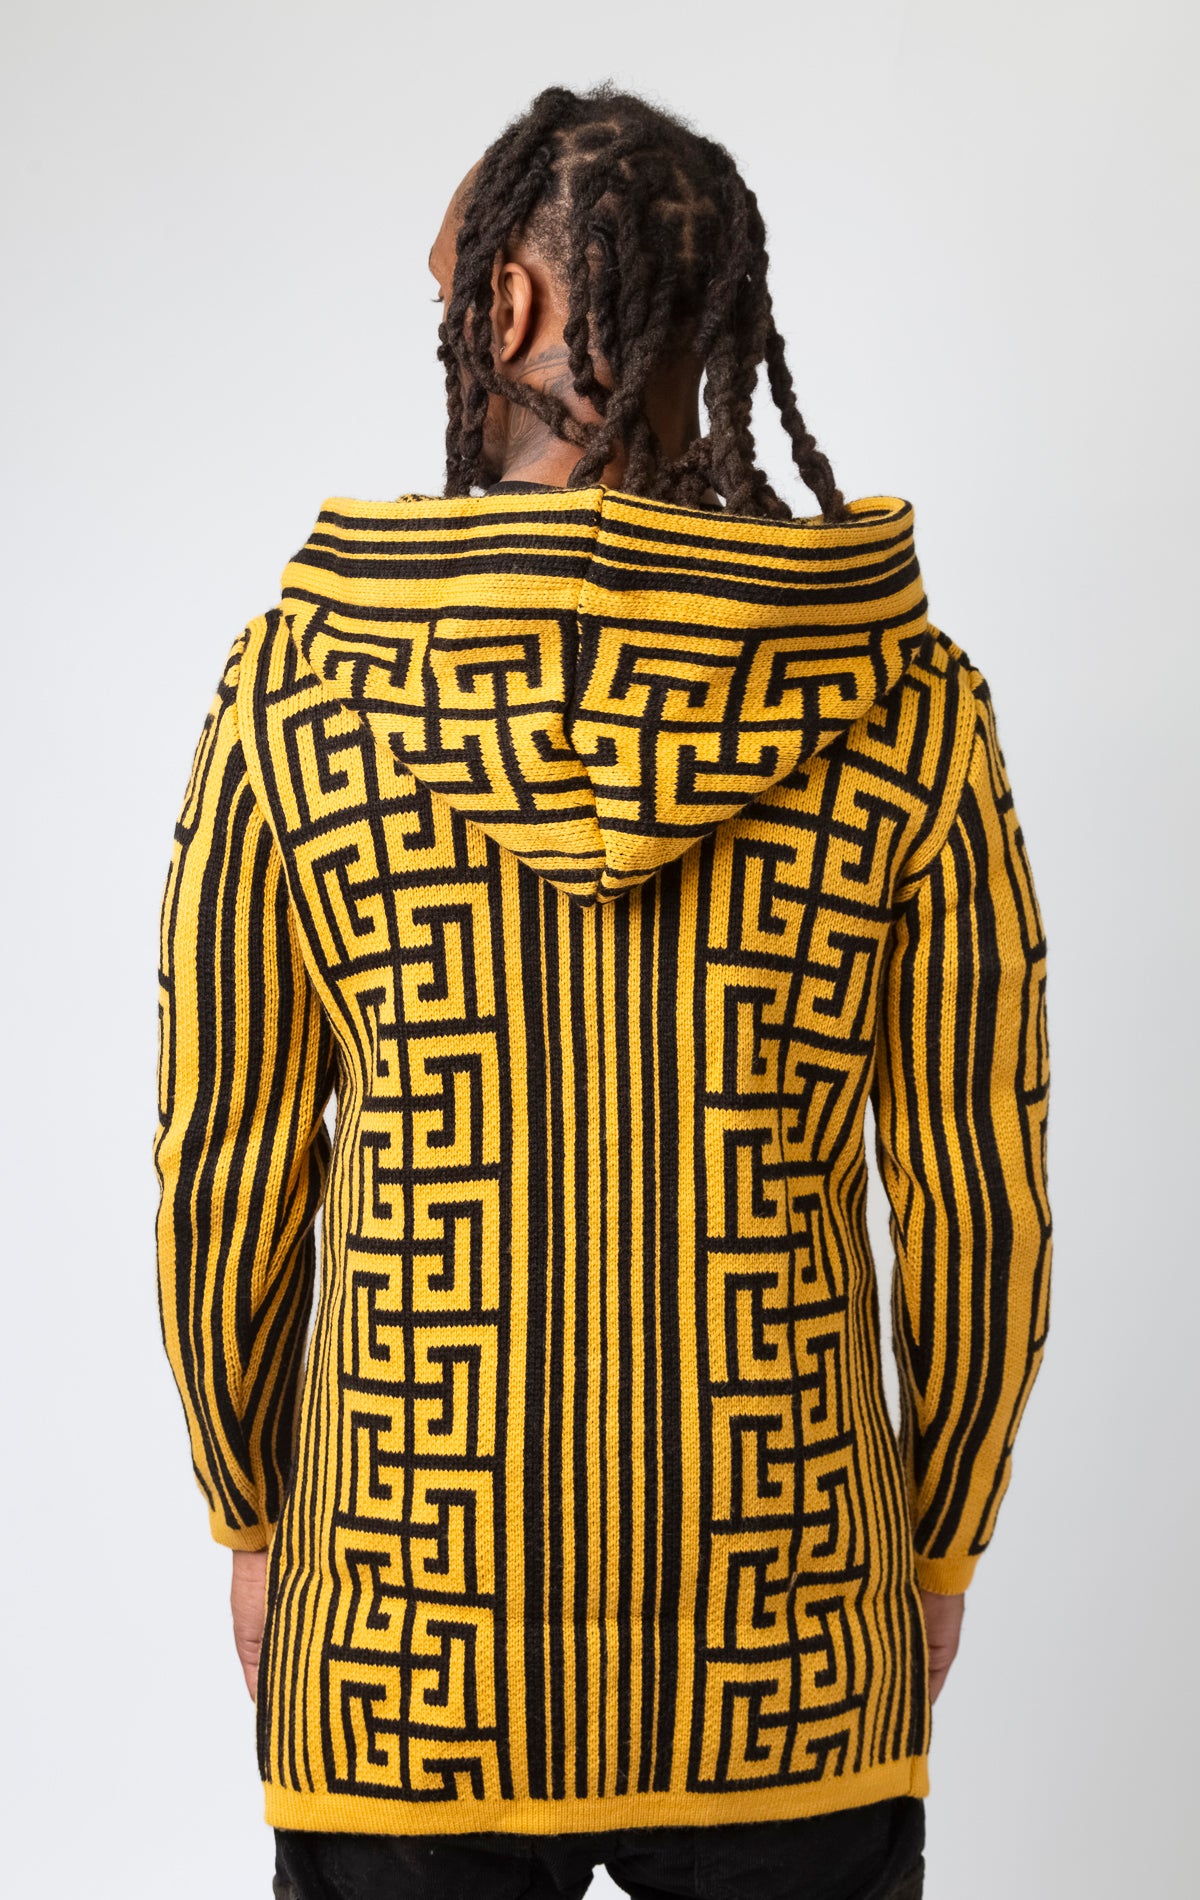 Mustard colored cardigan with a hood, front pocket, and pattern design.